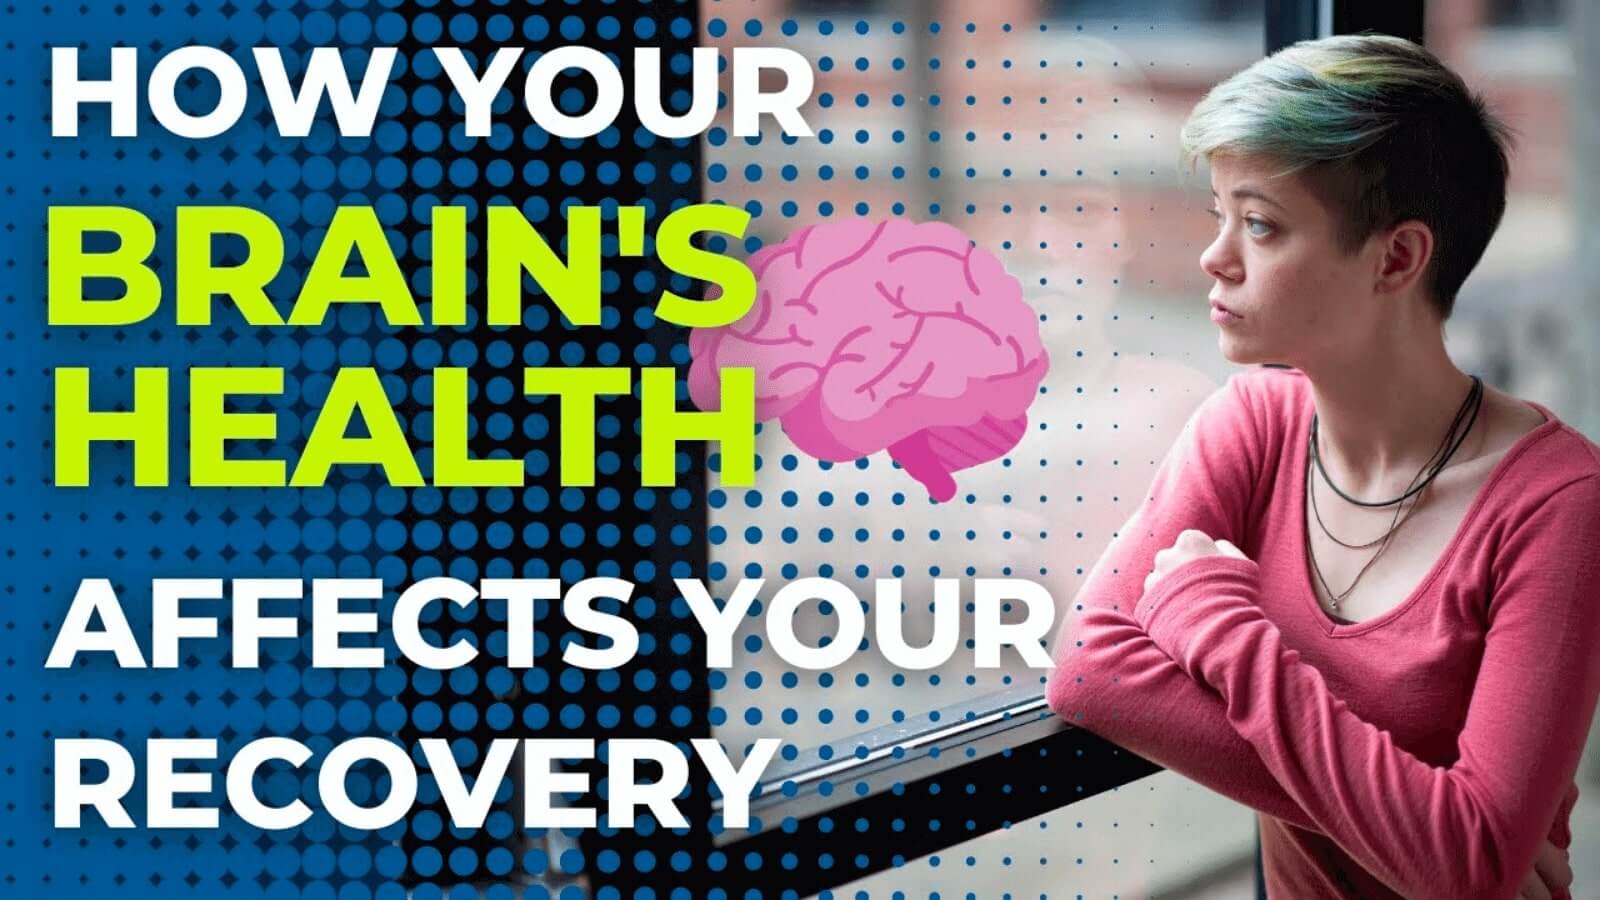 How your brain's health affects your recovery